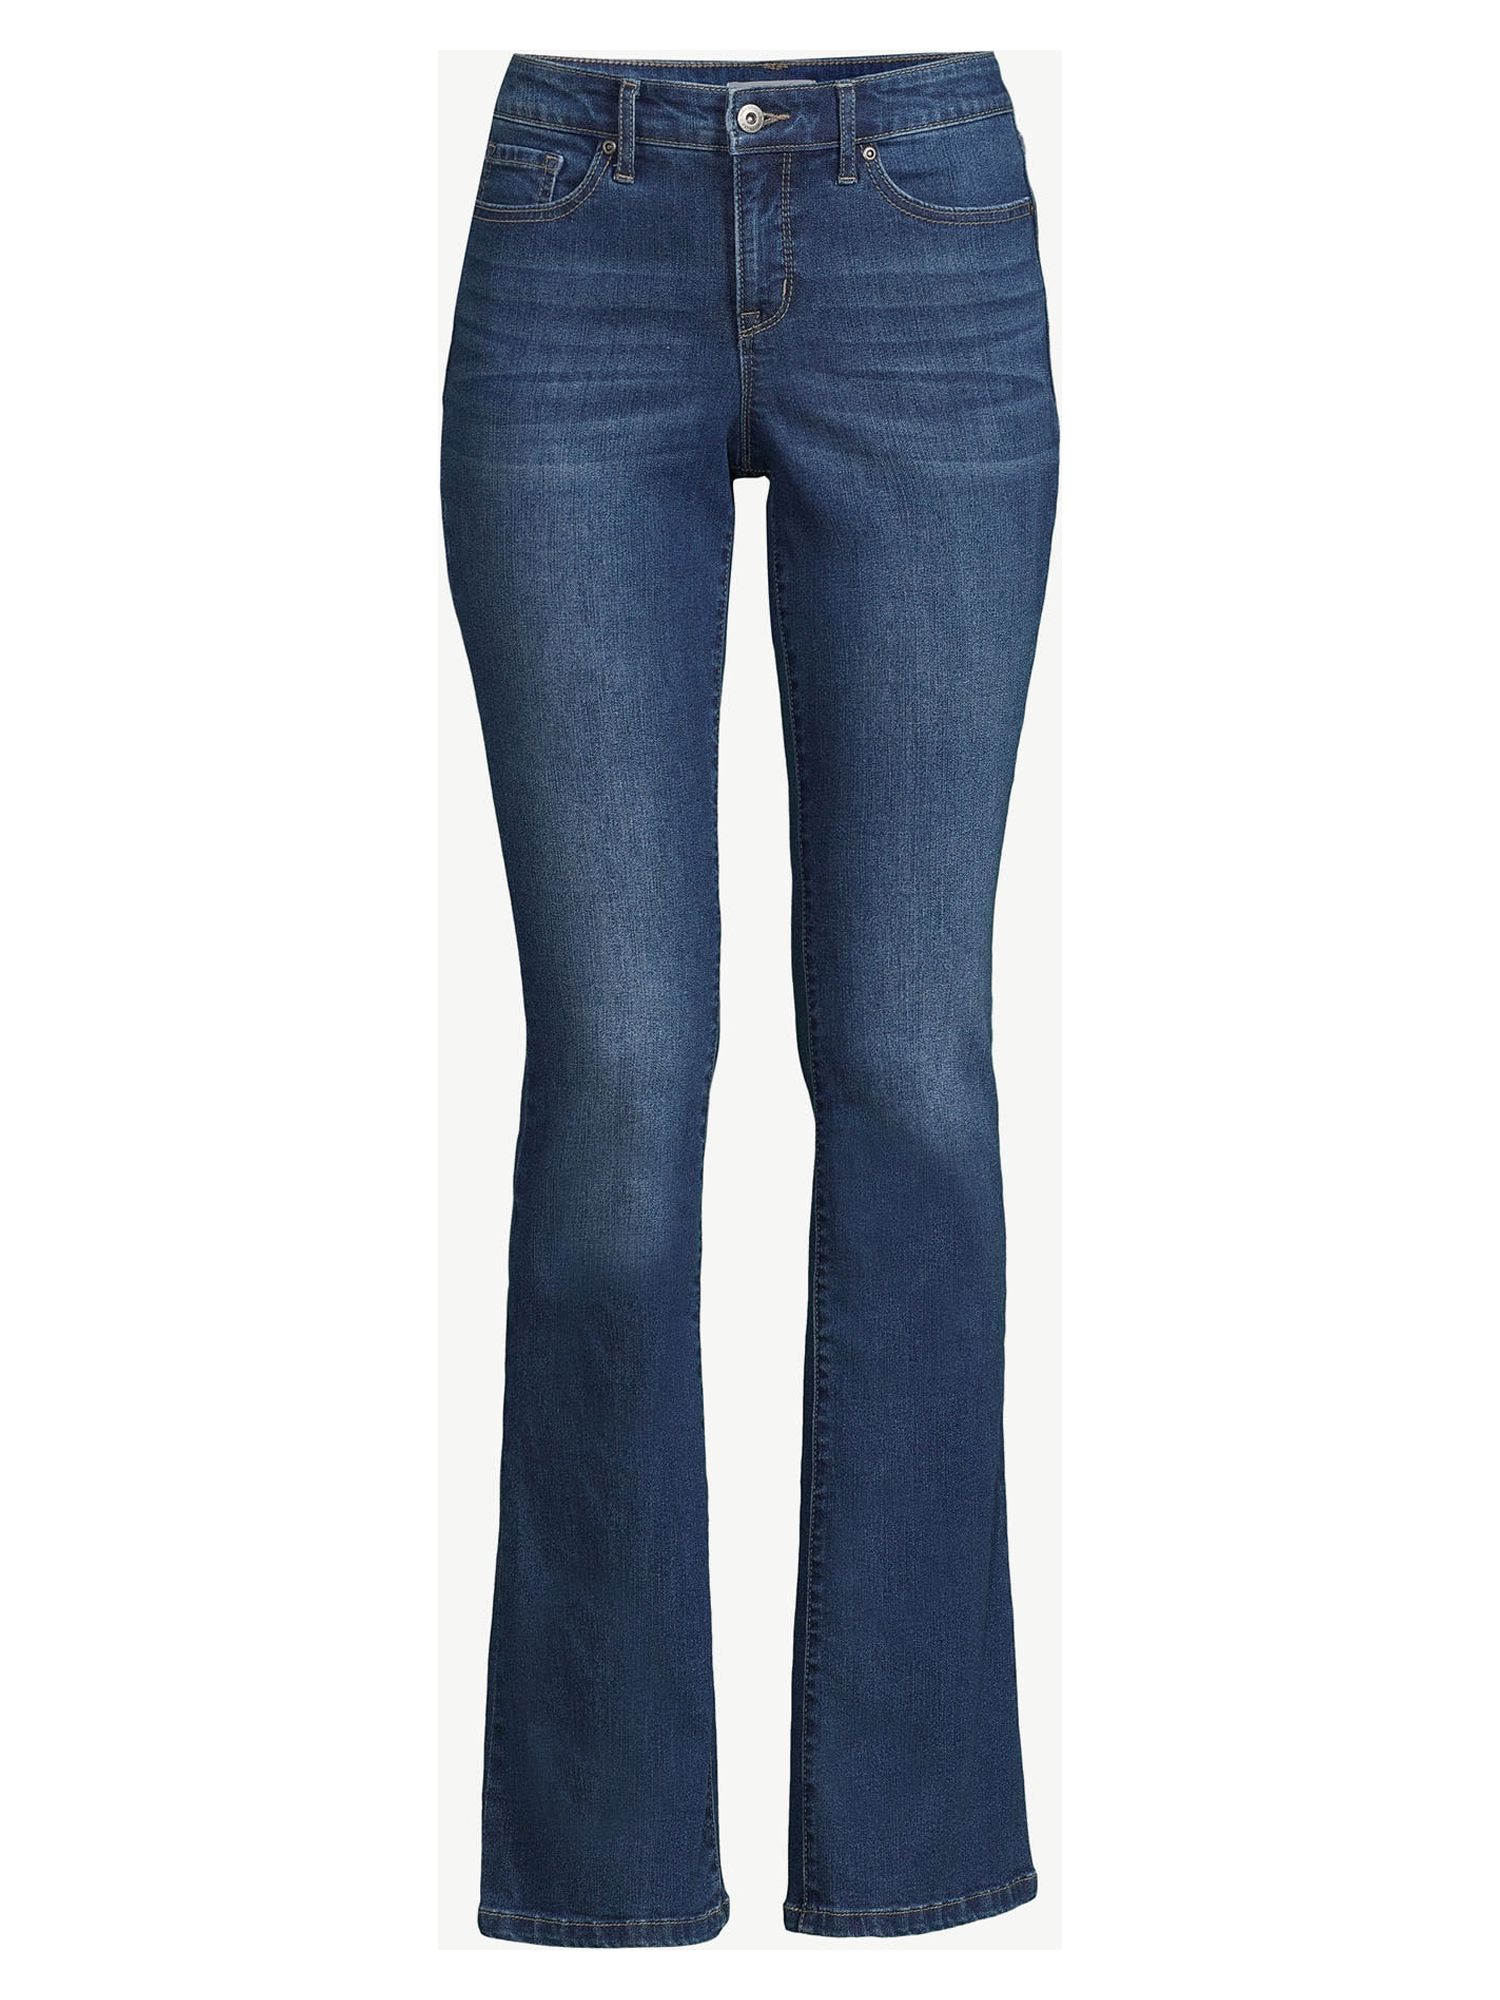 Shop Sofia Jeans Women's Marisol Bootcut Mid Rise Jeans - Great Prices ...